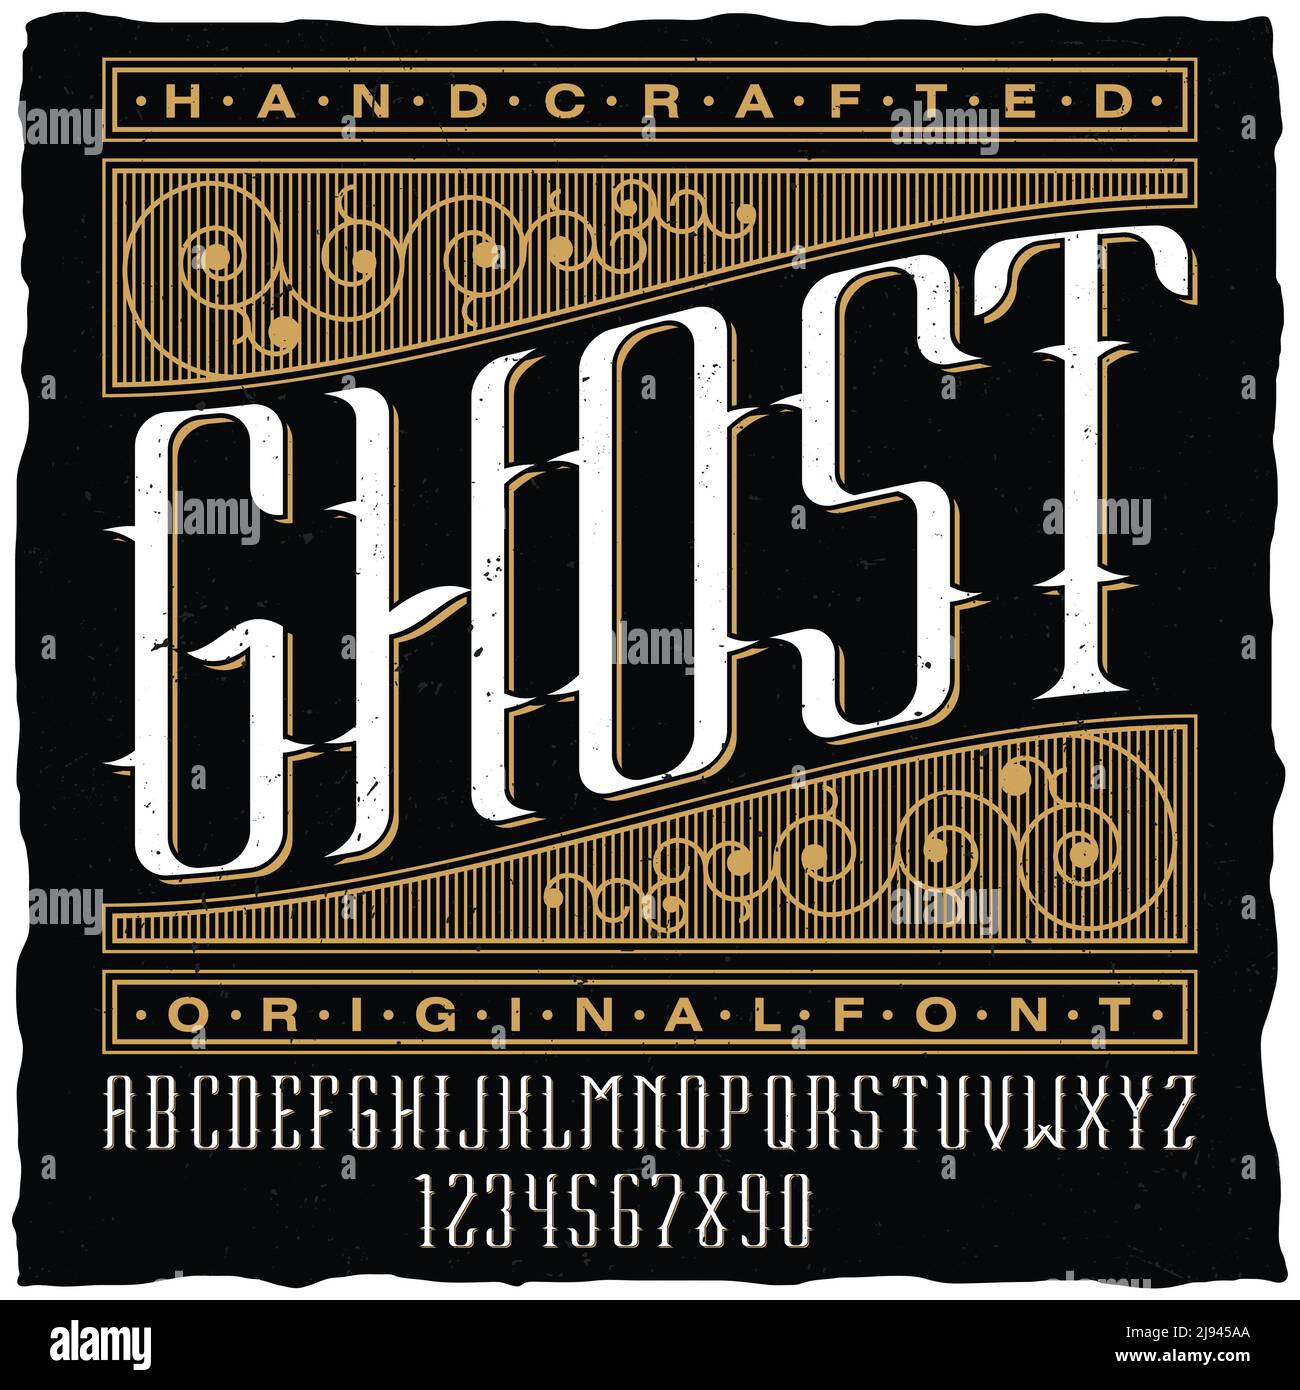 Handcrafted ghost poster with original label font on black background vector illustration Stock Vector